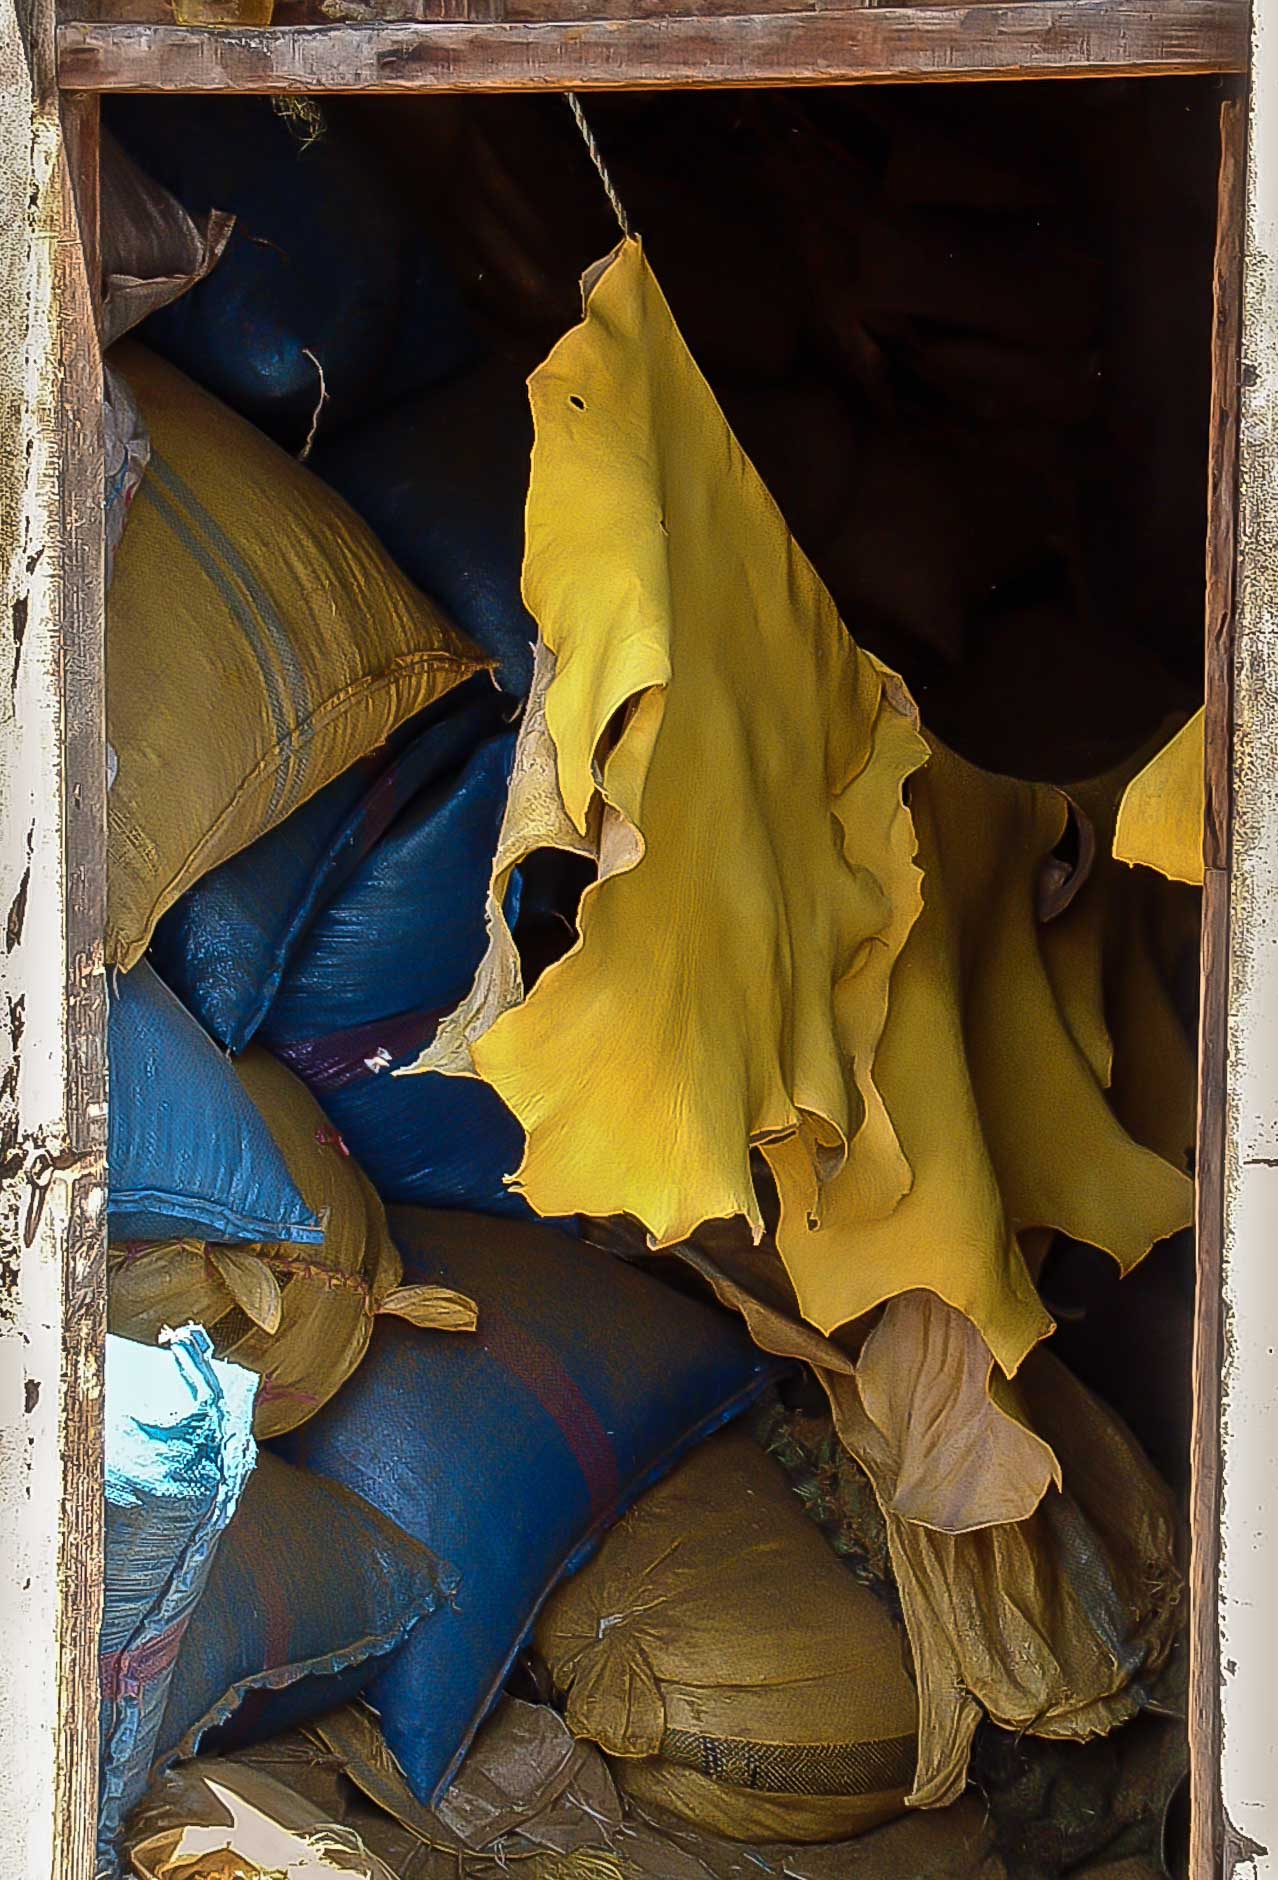 Leather to dry, Morocco